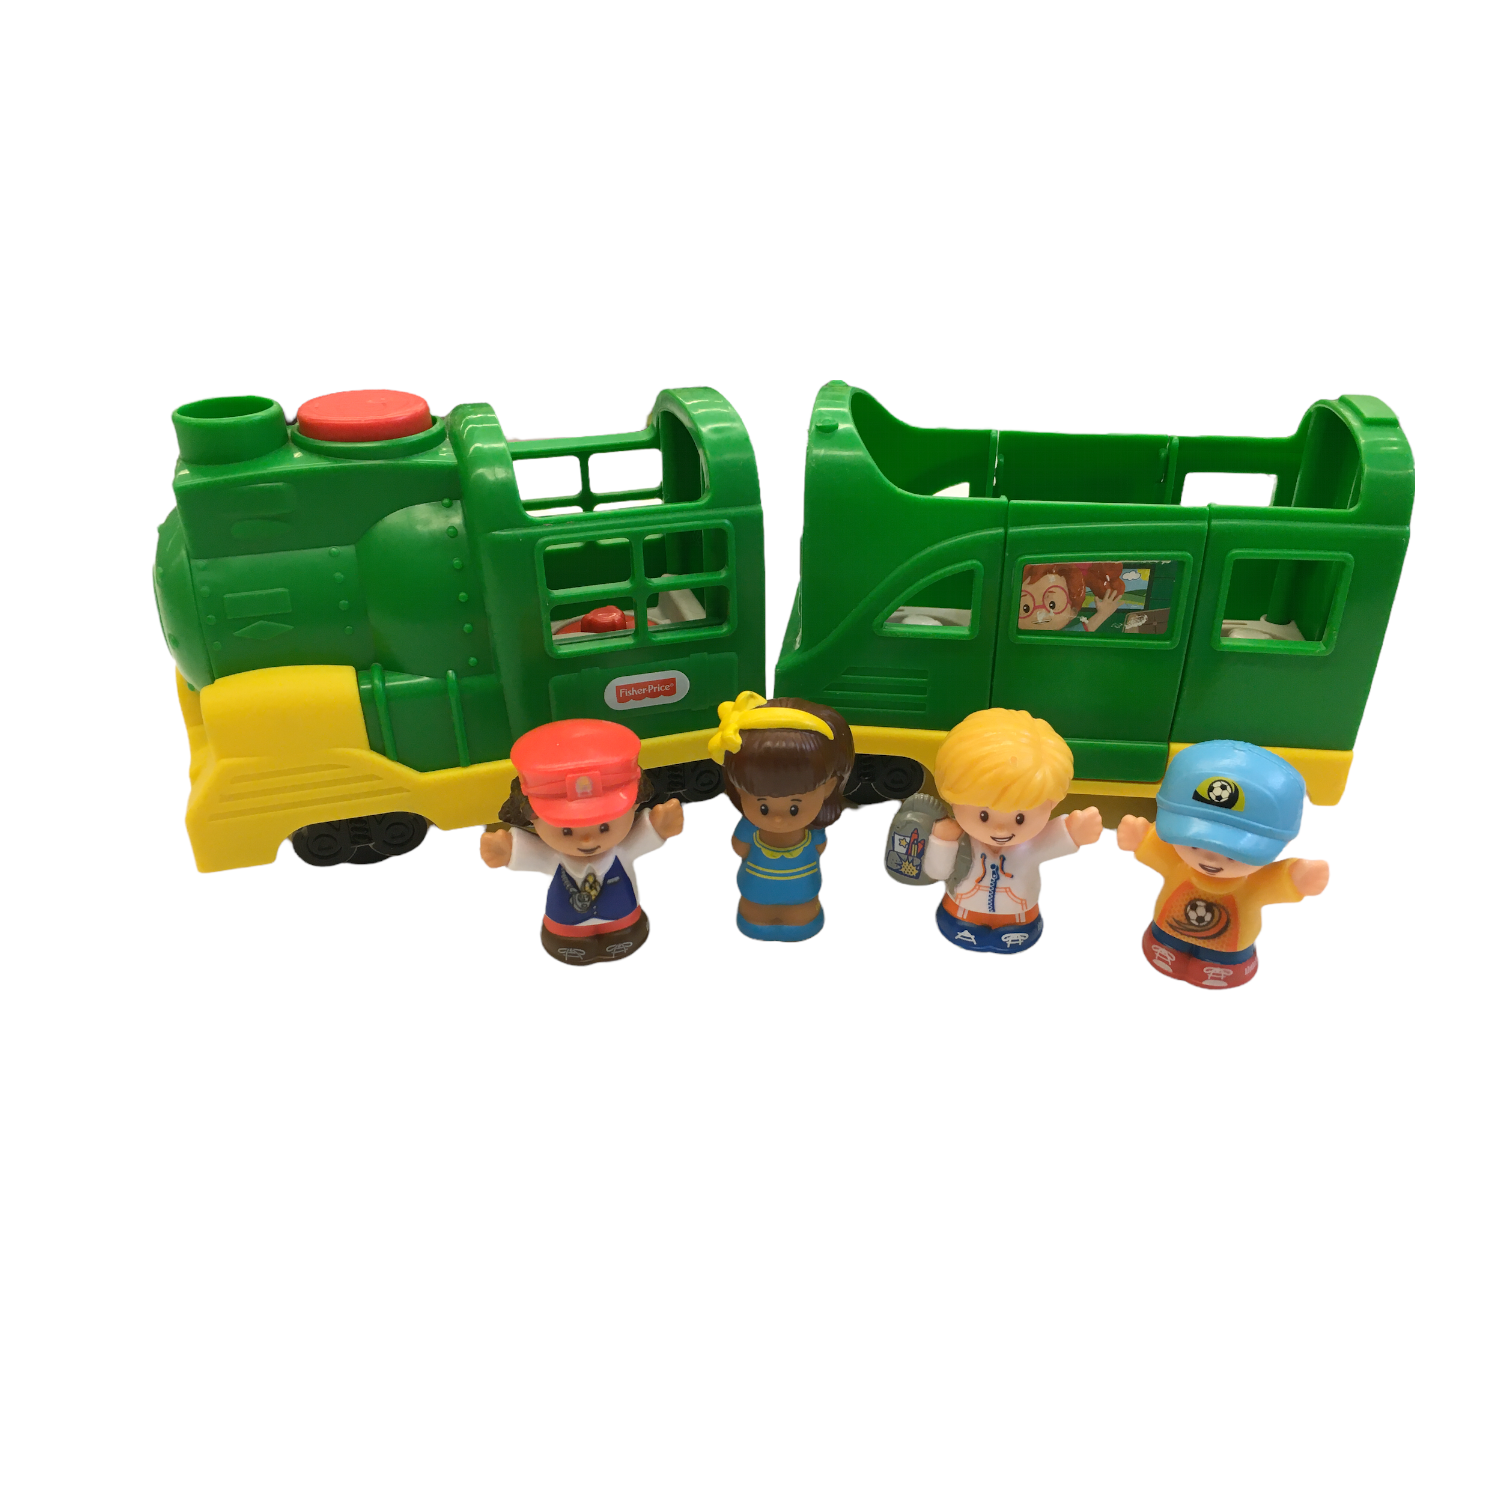 Train (Green), Toys

#resalerocks #pipsqueakresale #vancouverwa #portland #reusereducerecycle #fashiononabudget #chooseused #consignment #savemoney #shoplocal #weship #keepusopen #shoplocalonline #resale #resaleboutique #mommyandme #minime #fashion #reseller                                                                                                                                      Cross posted, items are located at #PipsqueakResaleBoutique, payments accepted: cash, paypal & credit cards. Any flaws will be described in the comments. More pictures available with link above. Local pick up available at the #VancouverMall, tax will be added (not included in price), shipping available (not included in price, *Clothing, shoes, books & DVDs for $6.99; please contact regarding shipment of toys or other larger items), item can be placed on hold with communication, message with any questions. Join Pipsqueak Resale - Online to see all the new items! Follow us on IG @pipsqueakresale & Thanks for looking! Due to the nature of consignment, any known flaws will be described; ALL SHIPPED SALES ARE FINAL. All items are currently located inside Pipsqueak Resale Boutique as a store front items purchased on location before items are prepared for shipment will be refunded.